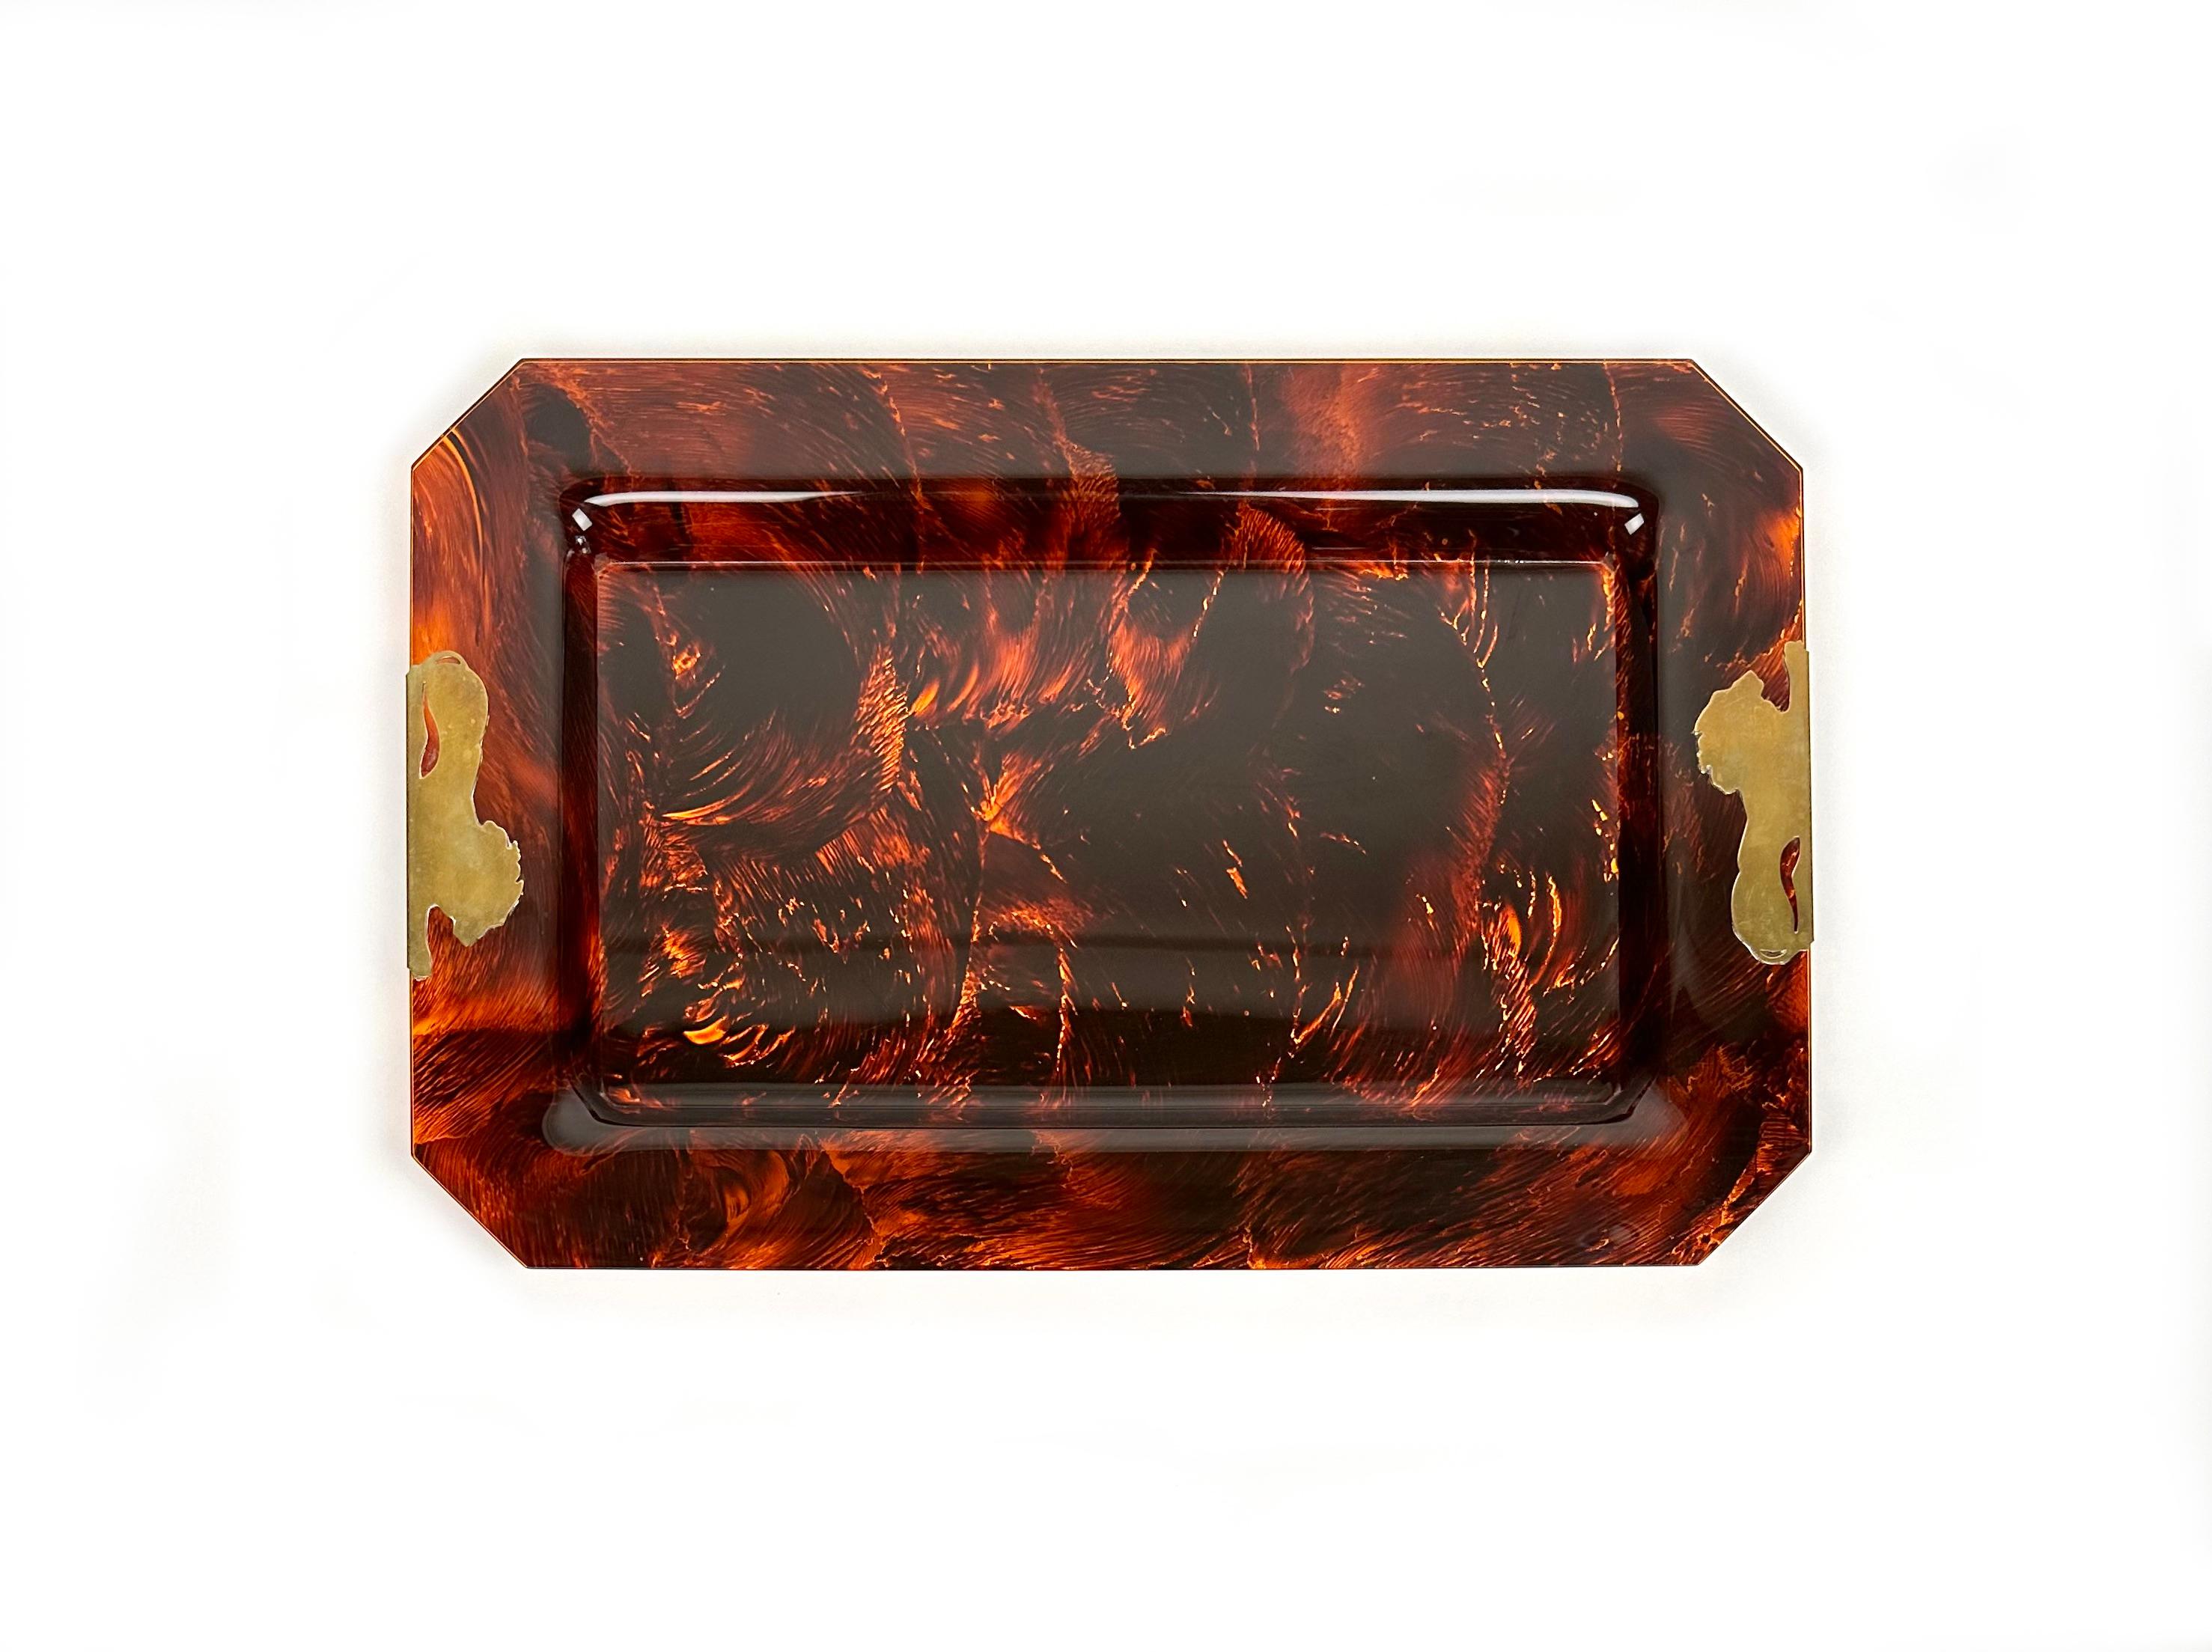 Rectangular centerpiece serving tray in tortoise-shell-effect lucite featuring two brass lions on two sides.

Made in Italy in the 1970s.